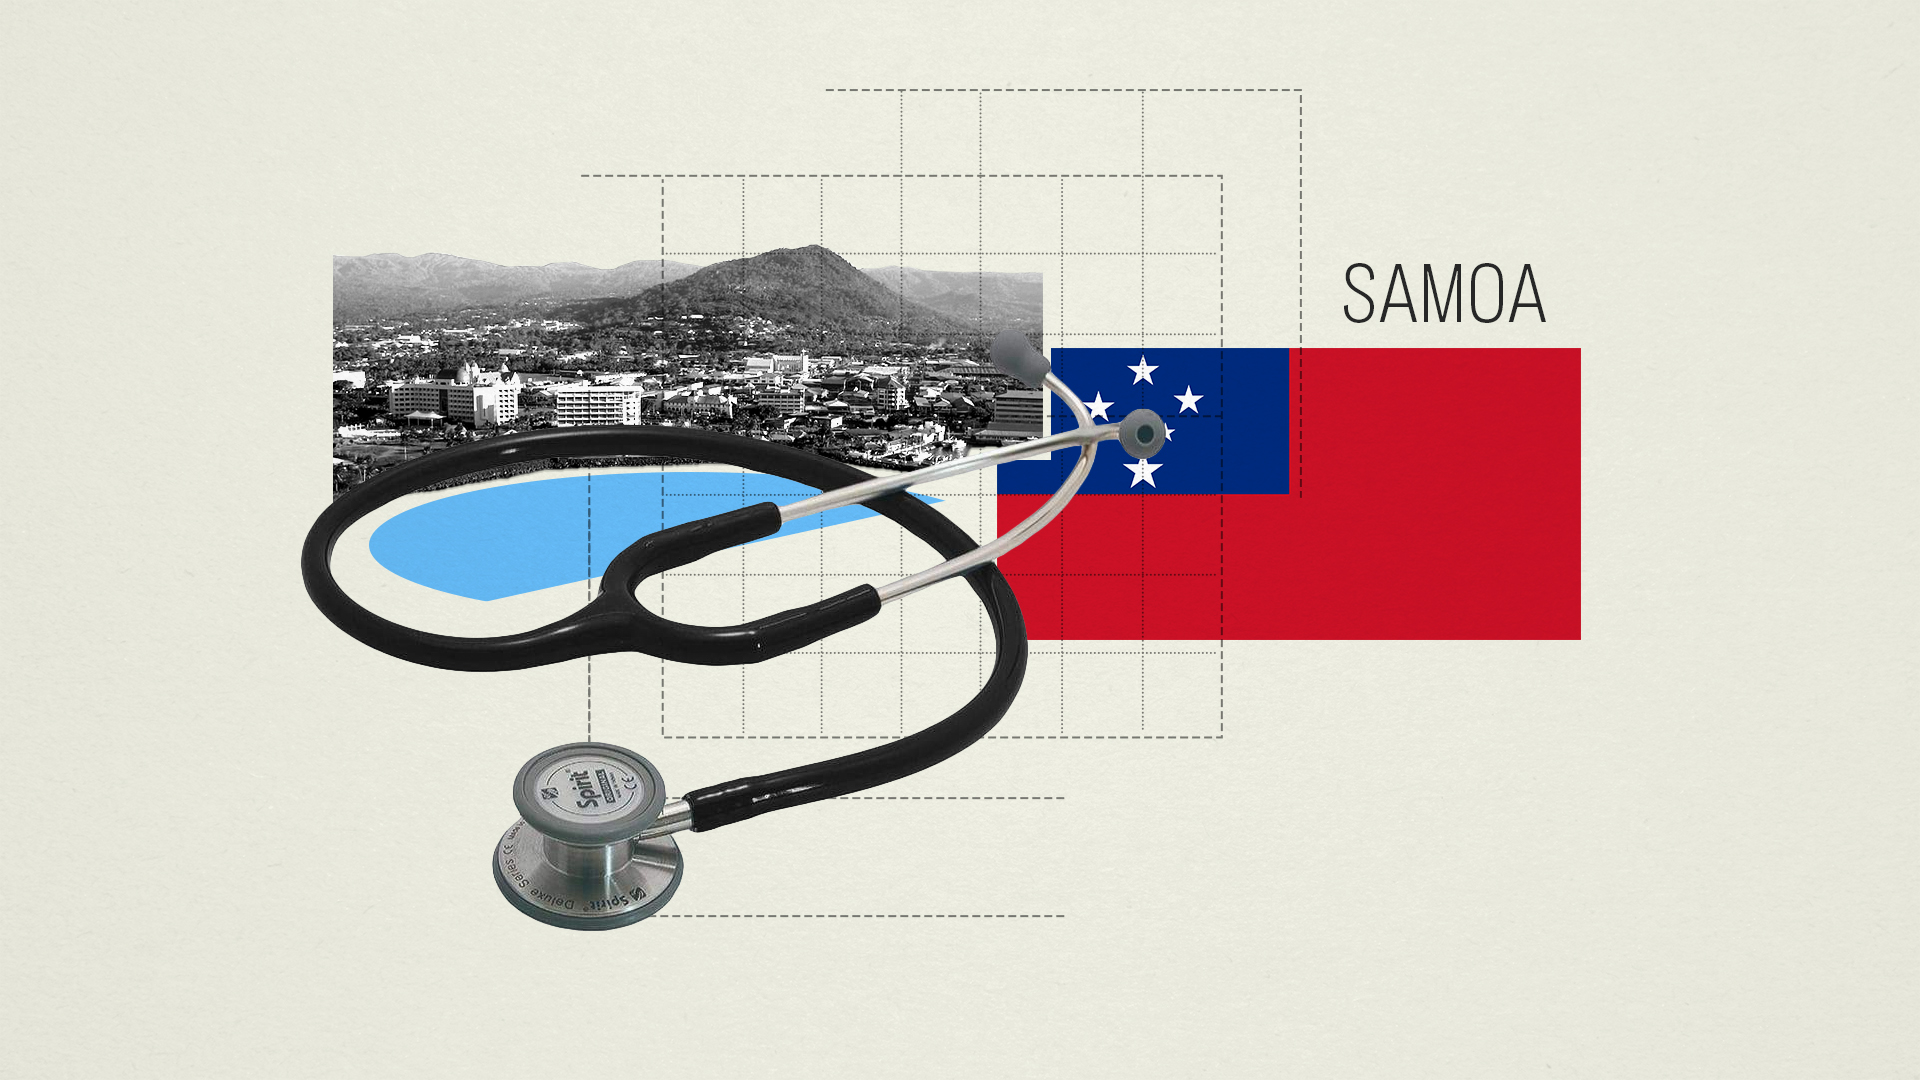 Samoa's flag with a stethoscope and patch of water in front of an island city.